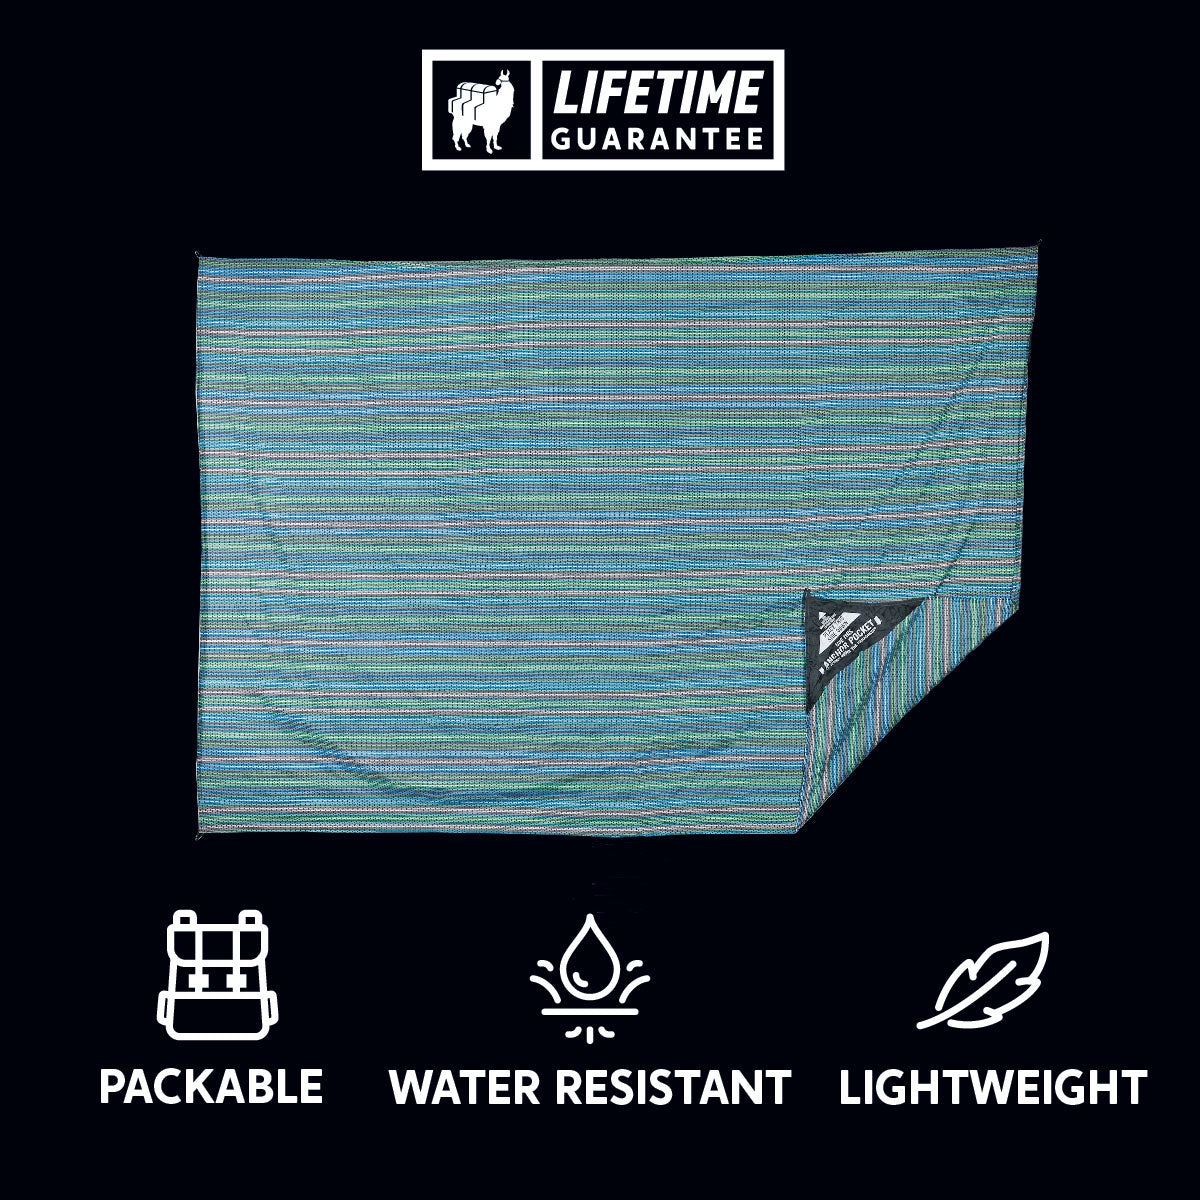 Packable, water resistant, lightweight sheet for sitting and keeping gear protected and dry. Lifetime Guarantee